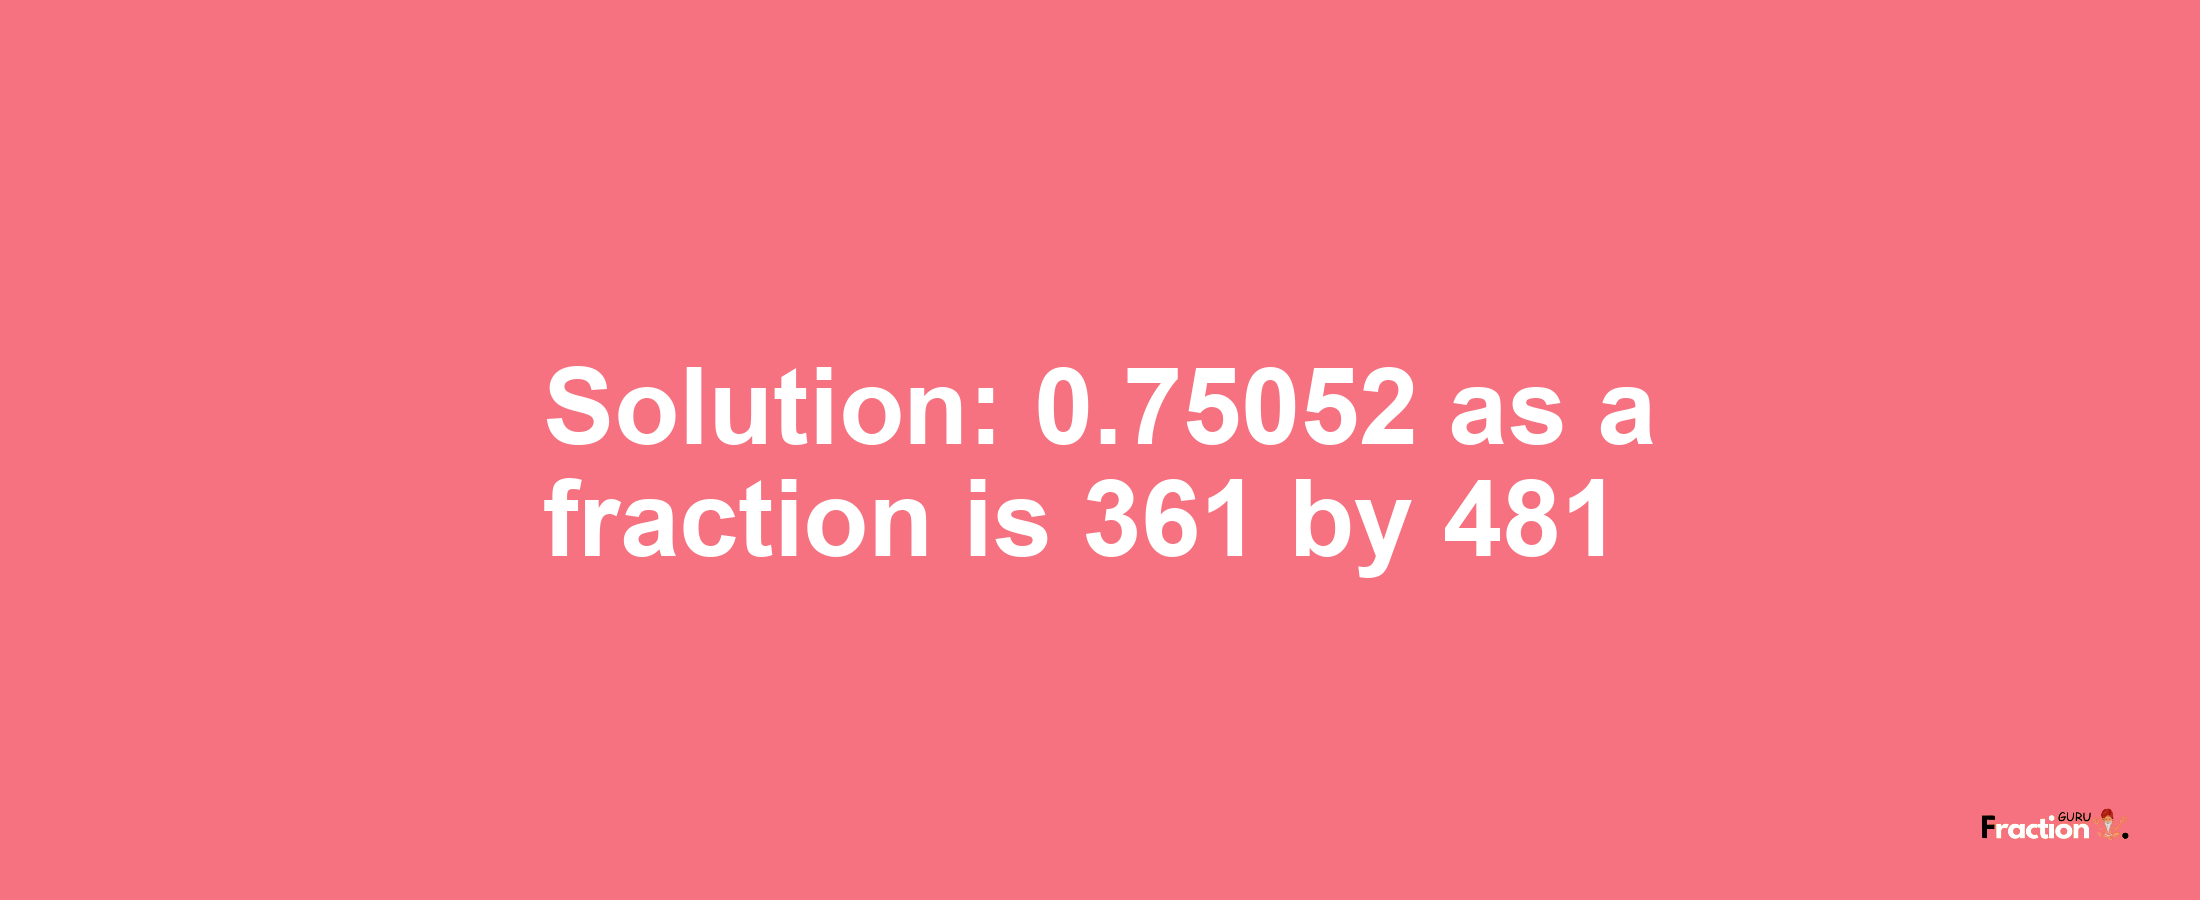 Solution:0.75052 as a fraction is 361/481